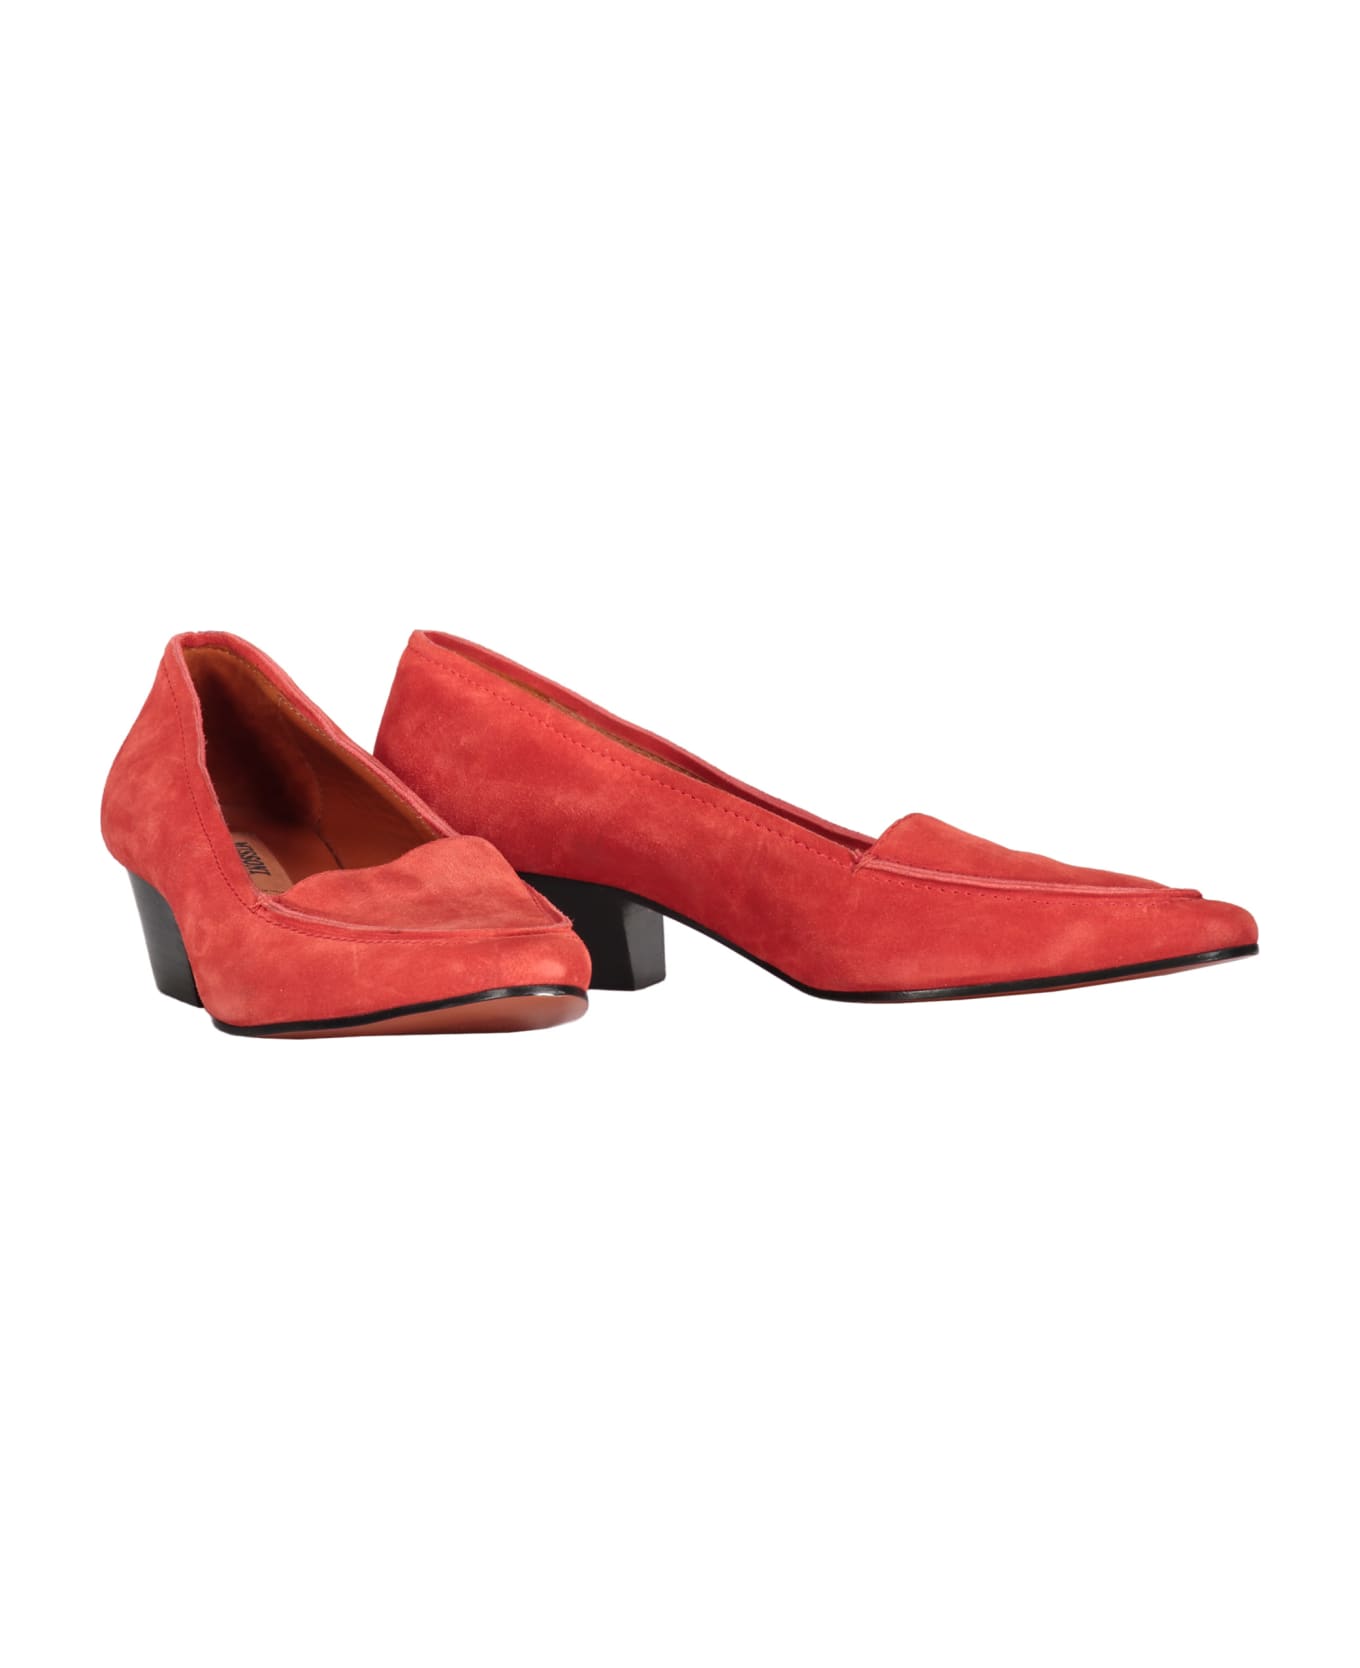 Missoni High Heel Leather Loafers - Coral